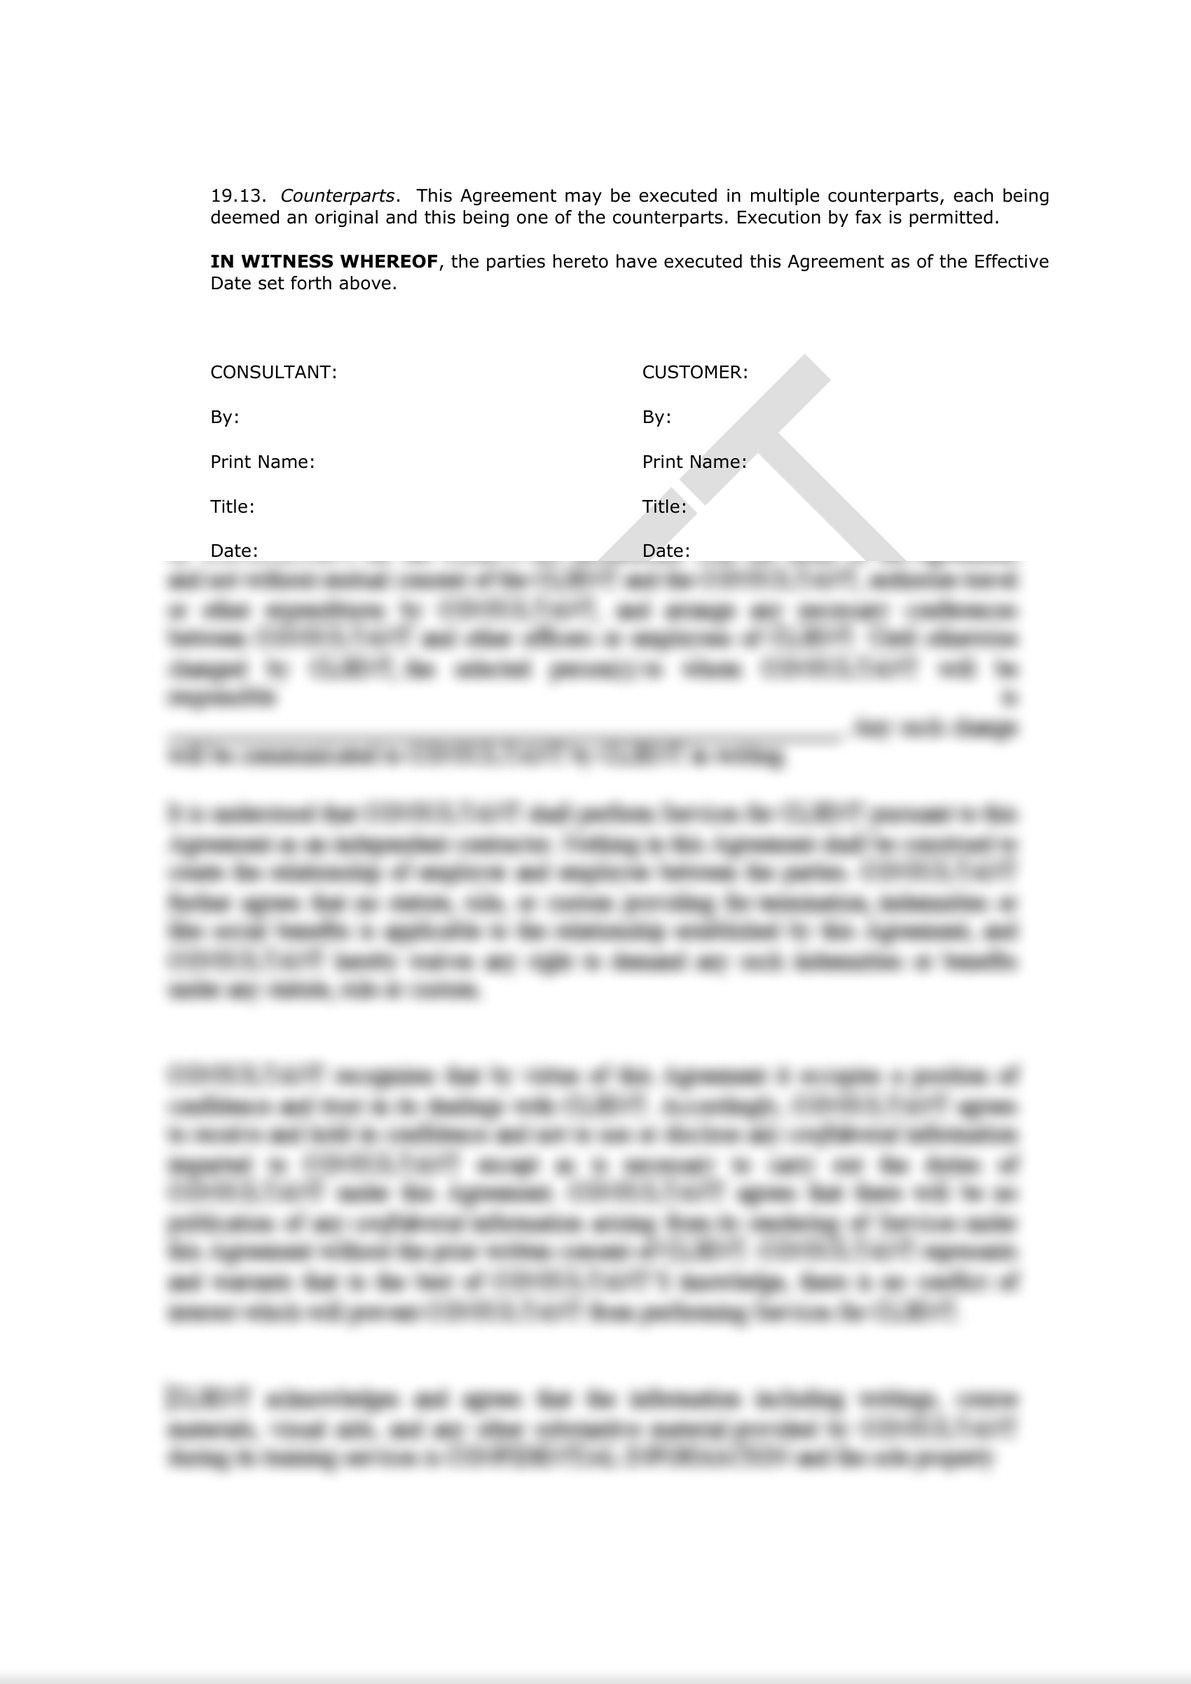 Software Consulting Agreement (Pro-Customer)-9